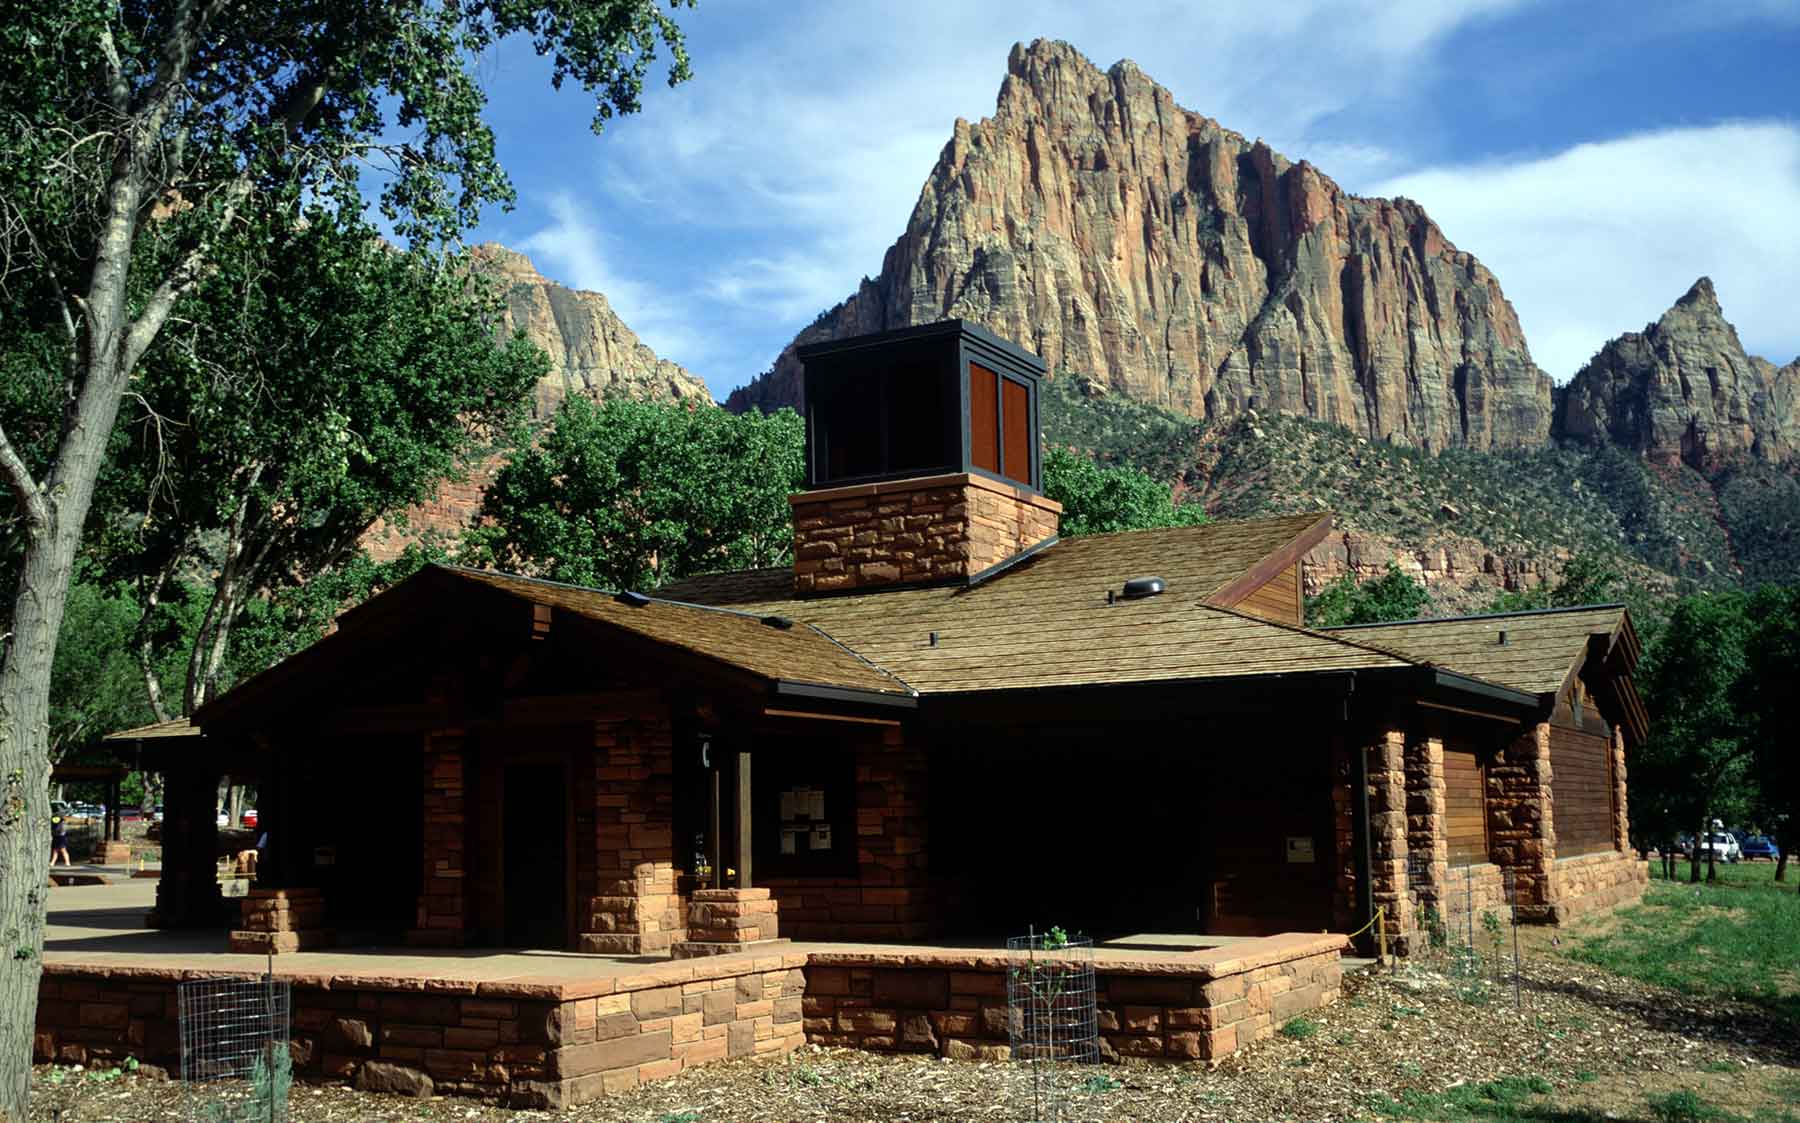 Photo of the sustainable visitor's center for Zion National Park